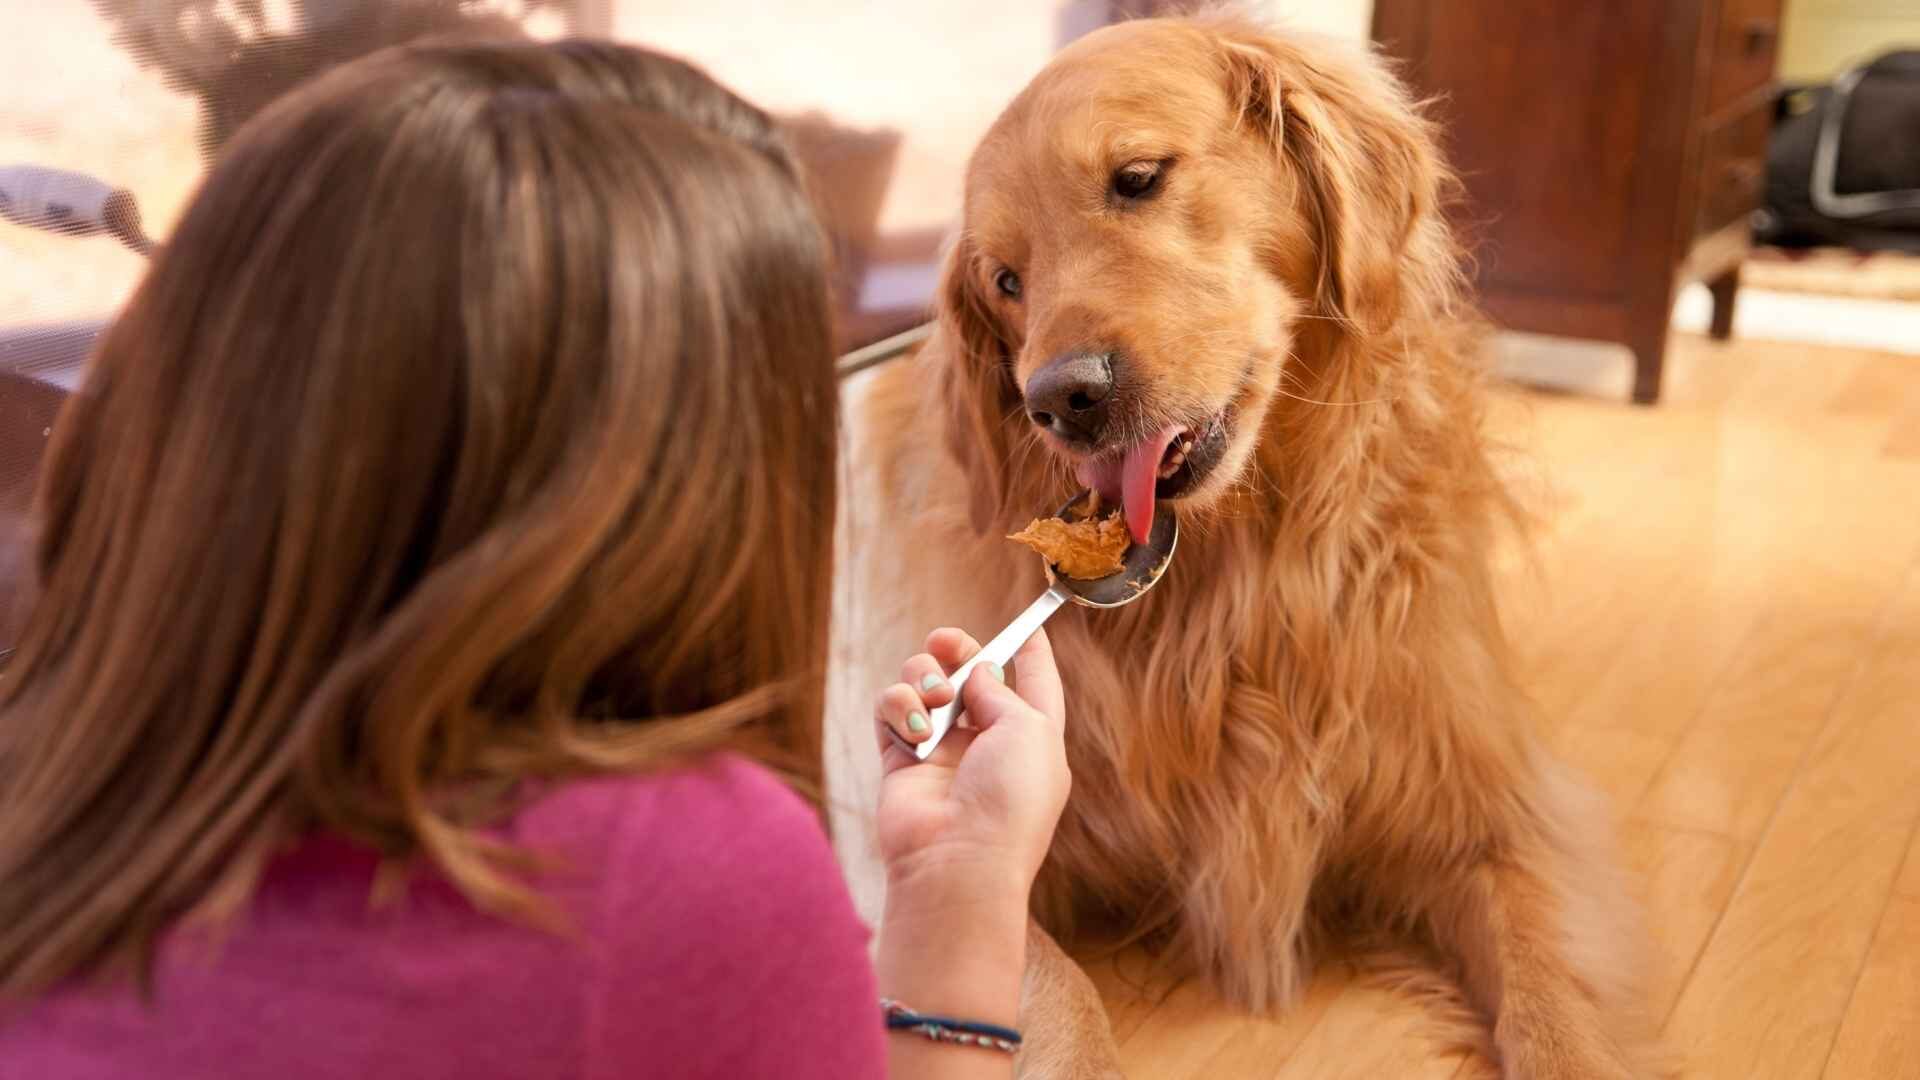 How to Feed a Dog with Diarrhea: Guide with 6 Homemade Foods